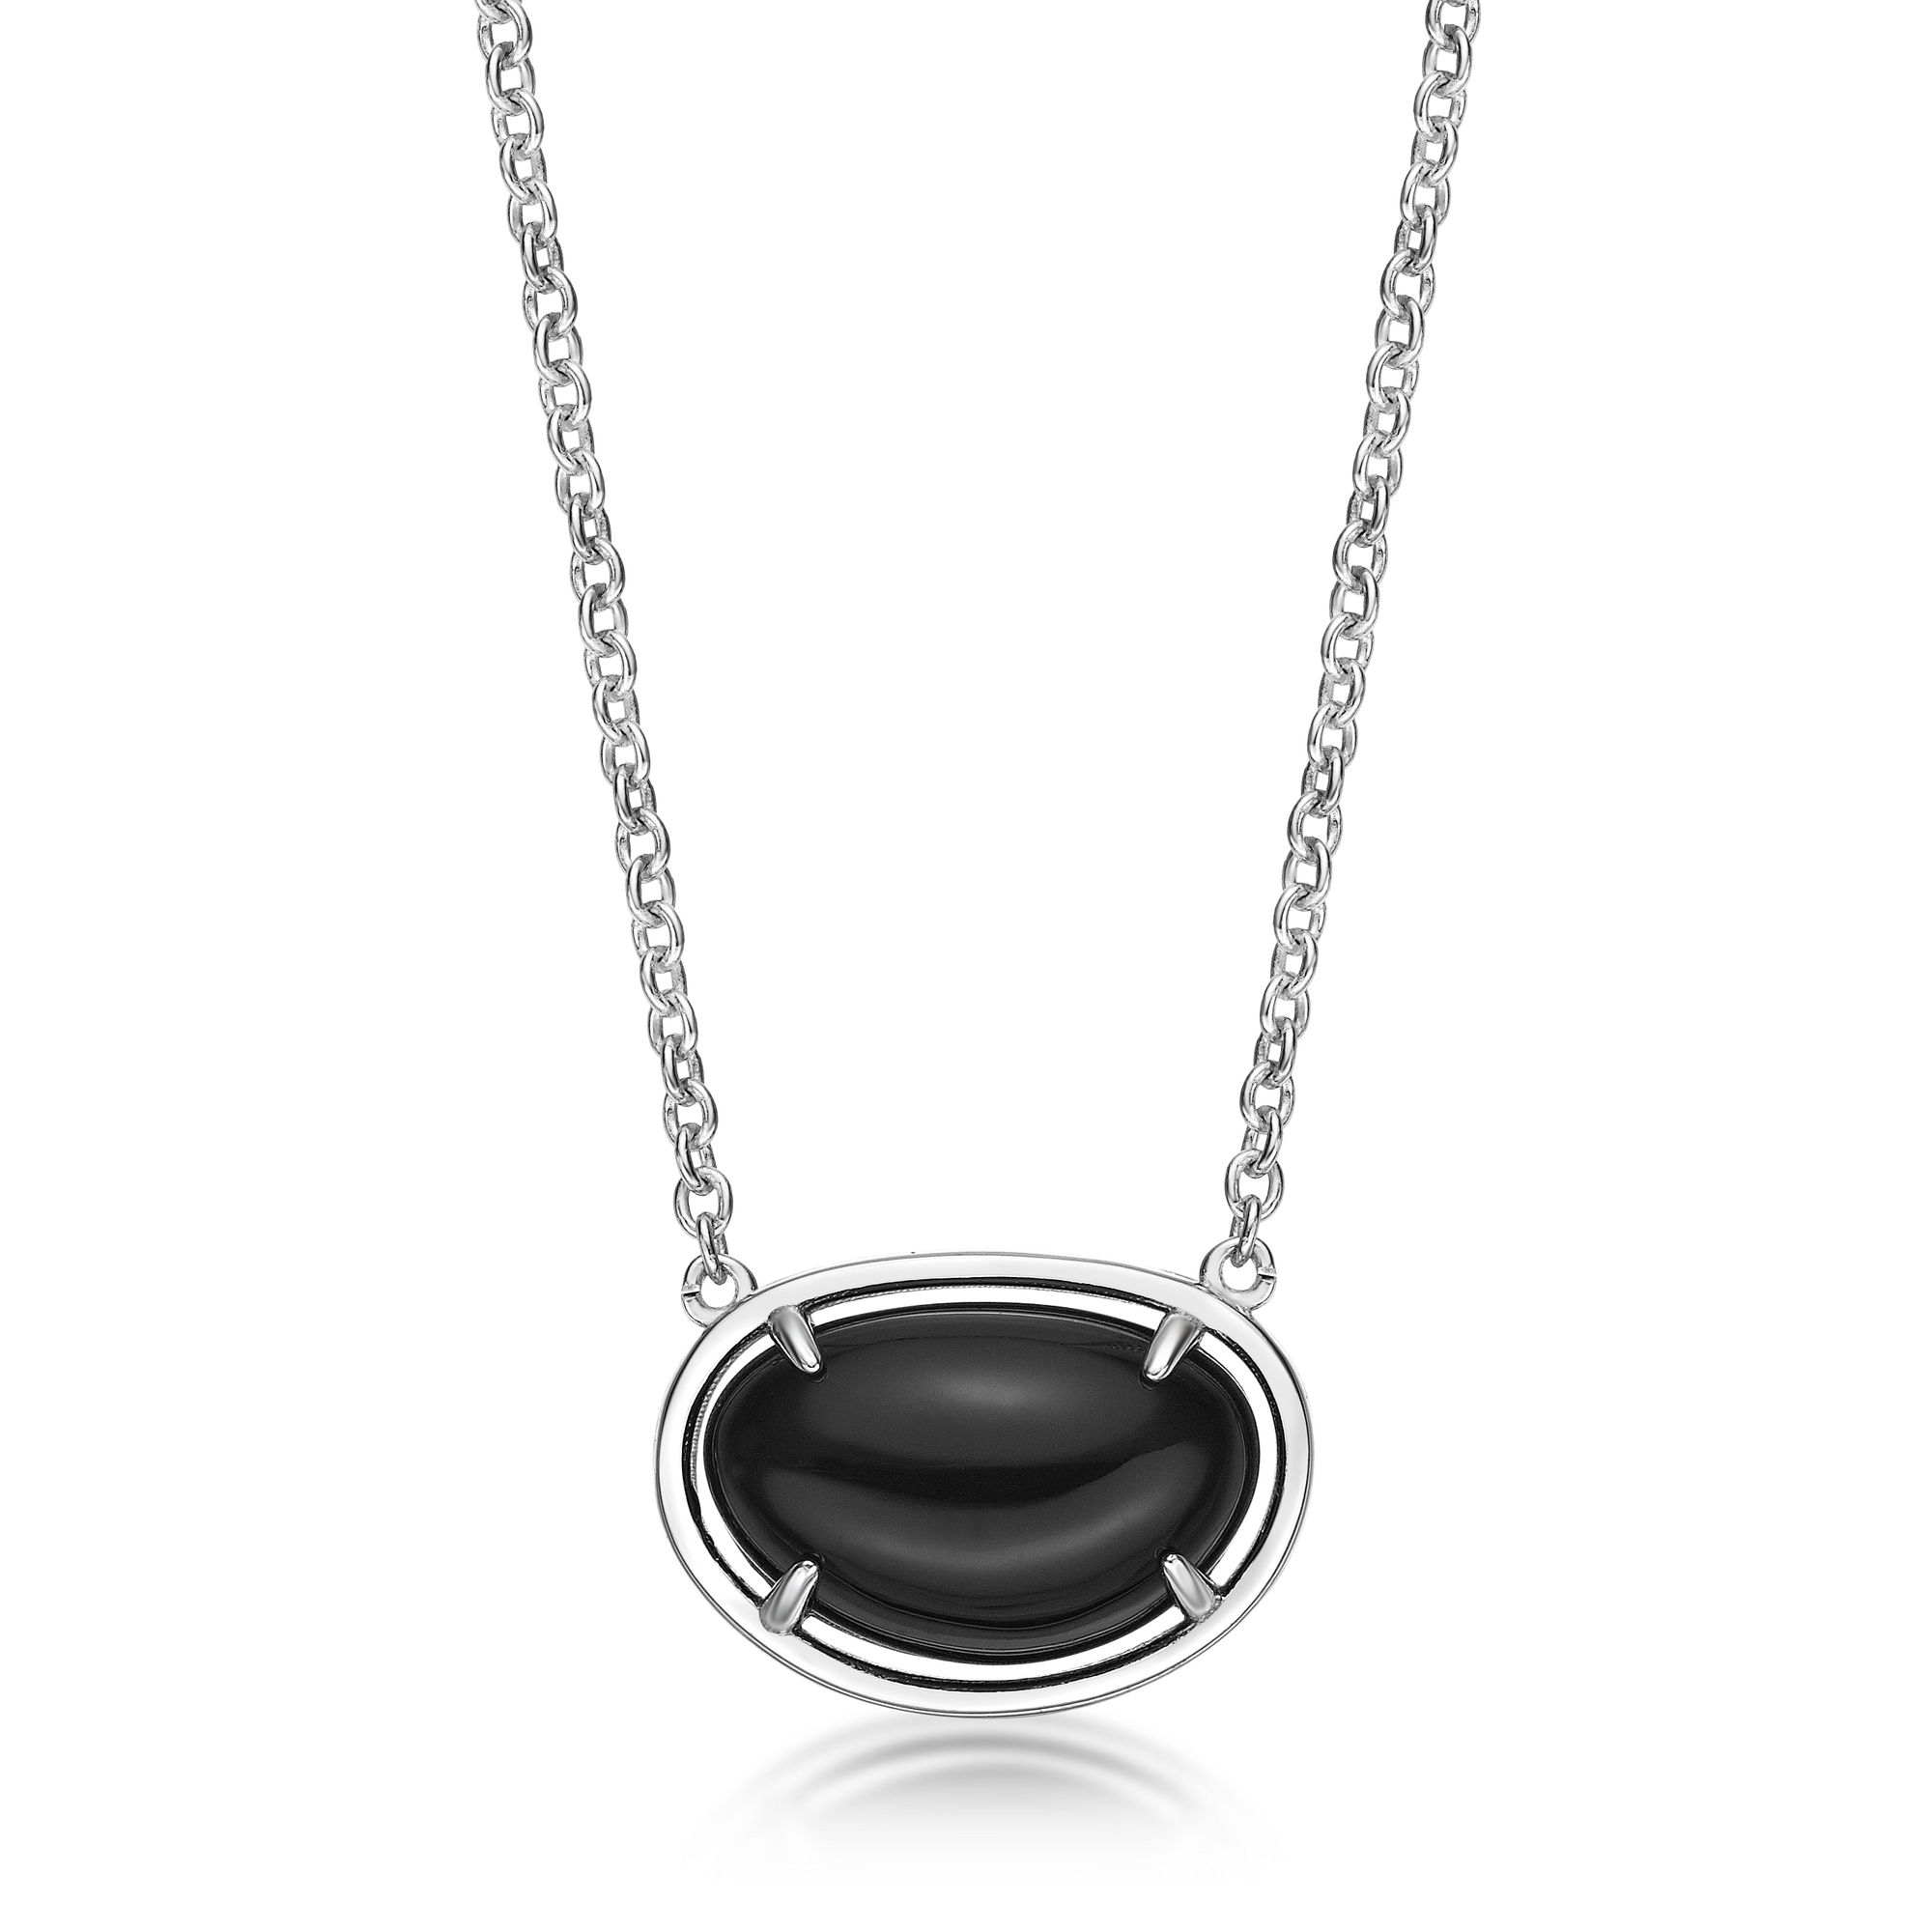 51601-pendant-default-collection-sterling-silver-51601-3-1.jpg